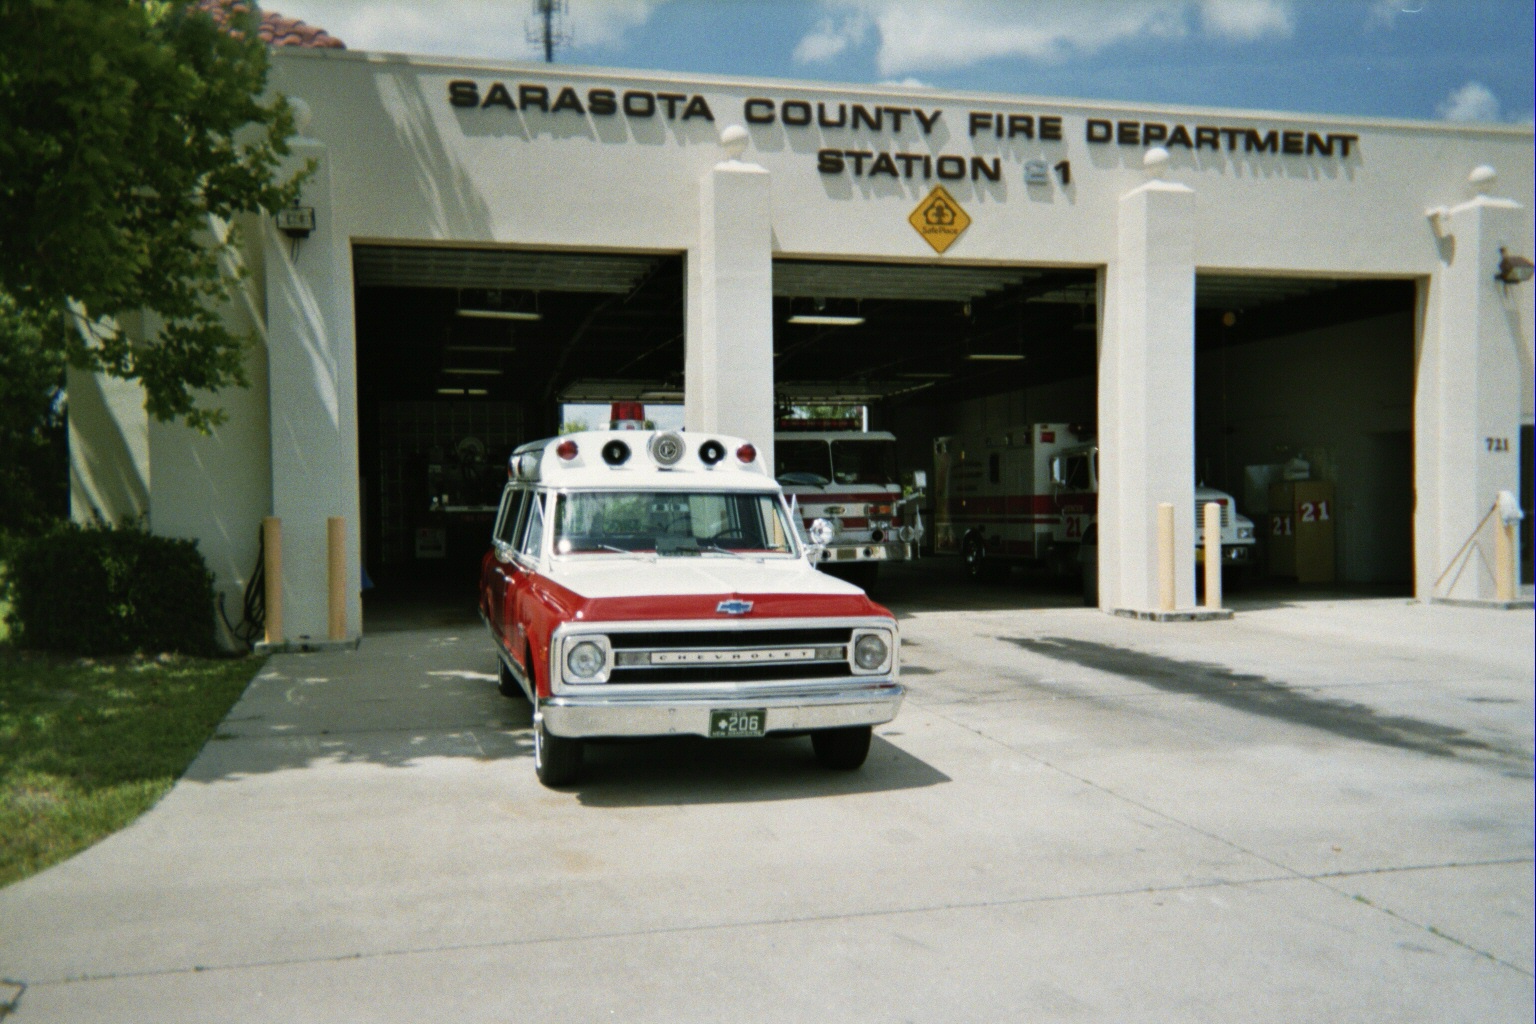 Station 31 is now Station 21 